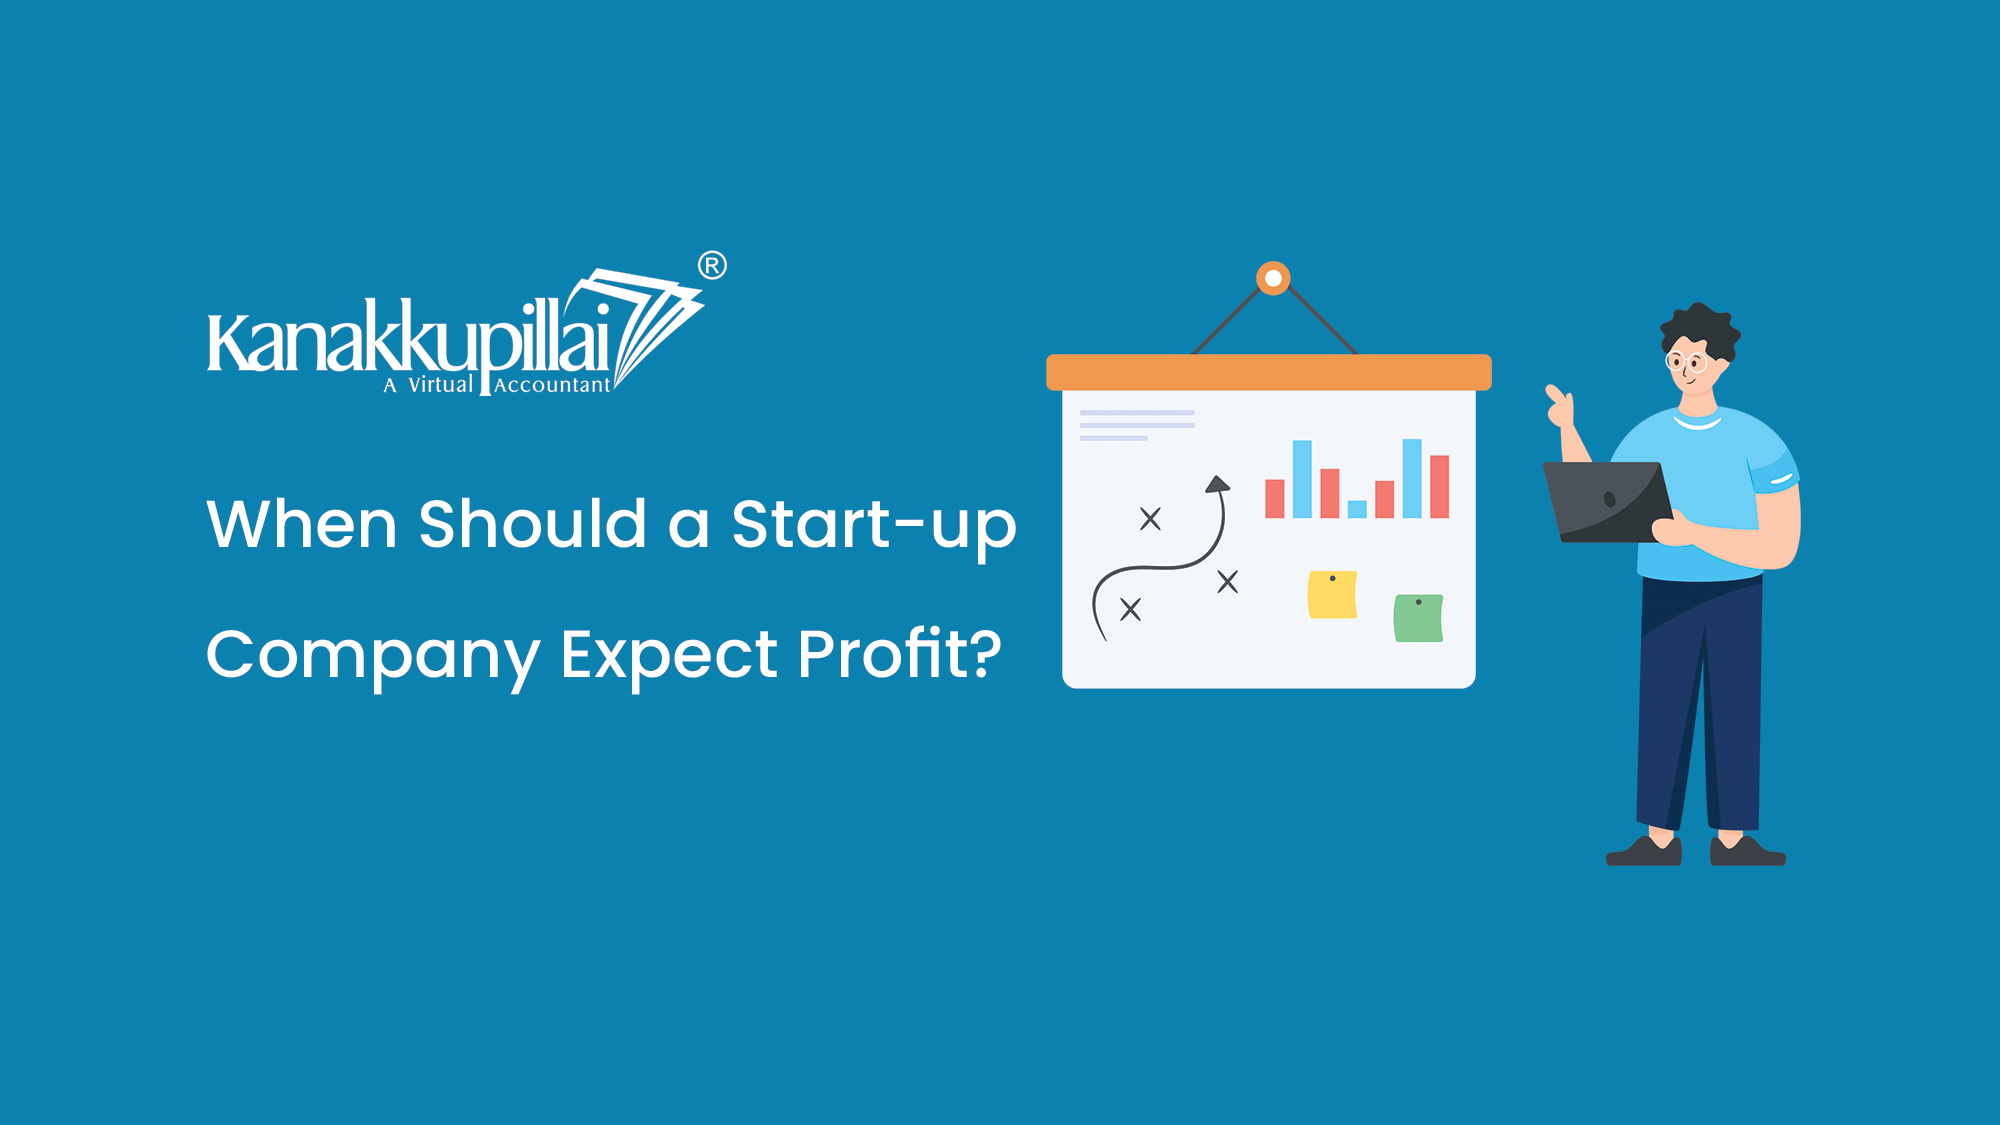 When Should a Start-up Company Expect Profit?